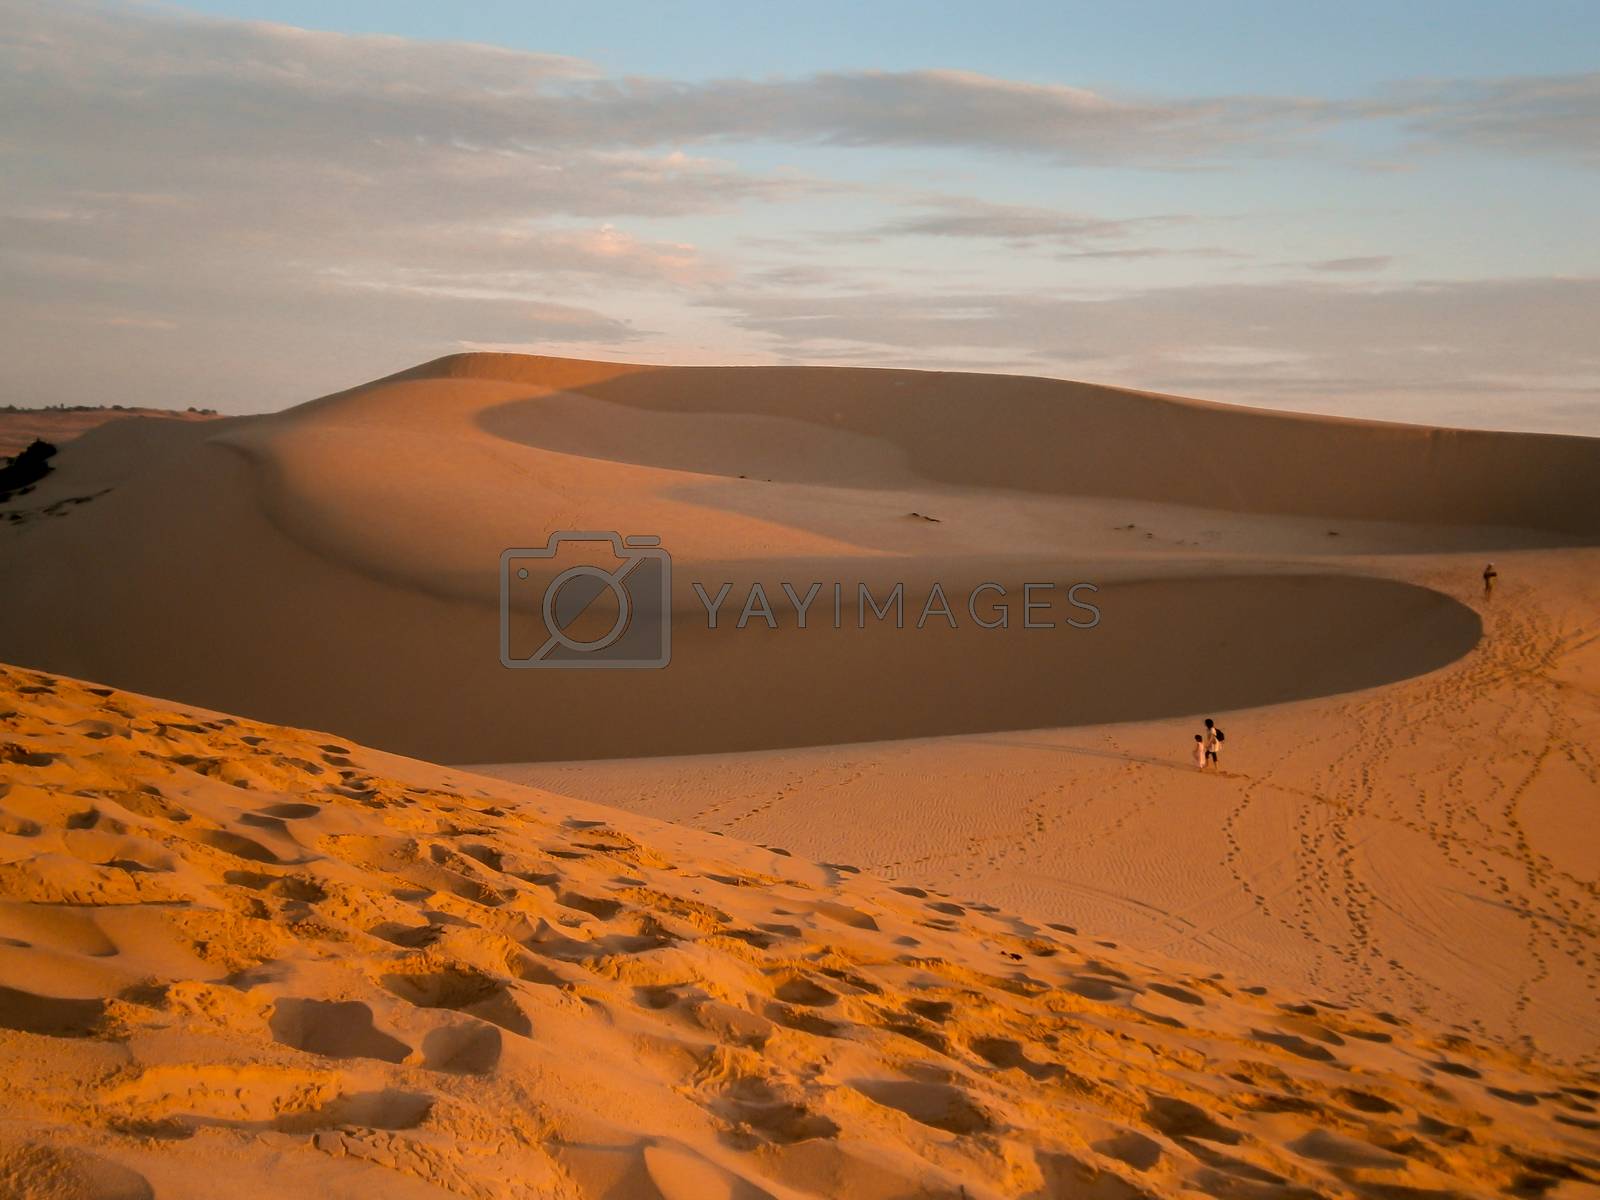 Royalty free image of Beautiful orange sand dunes by arvidnorberg